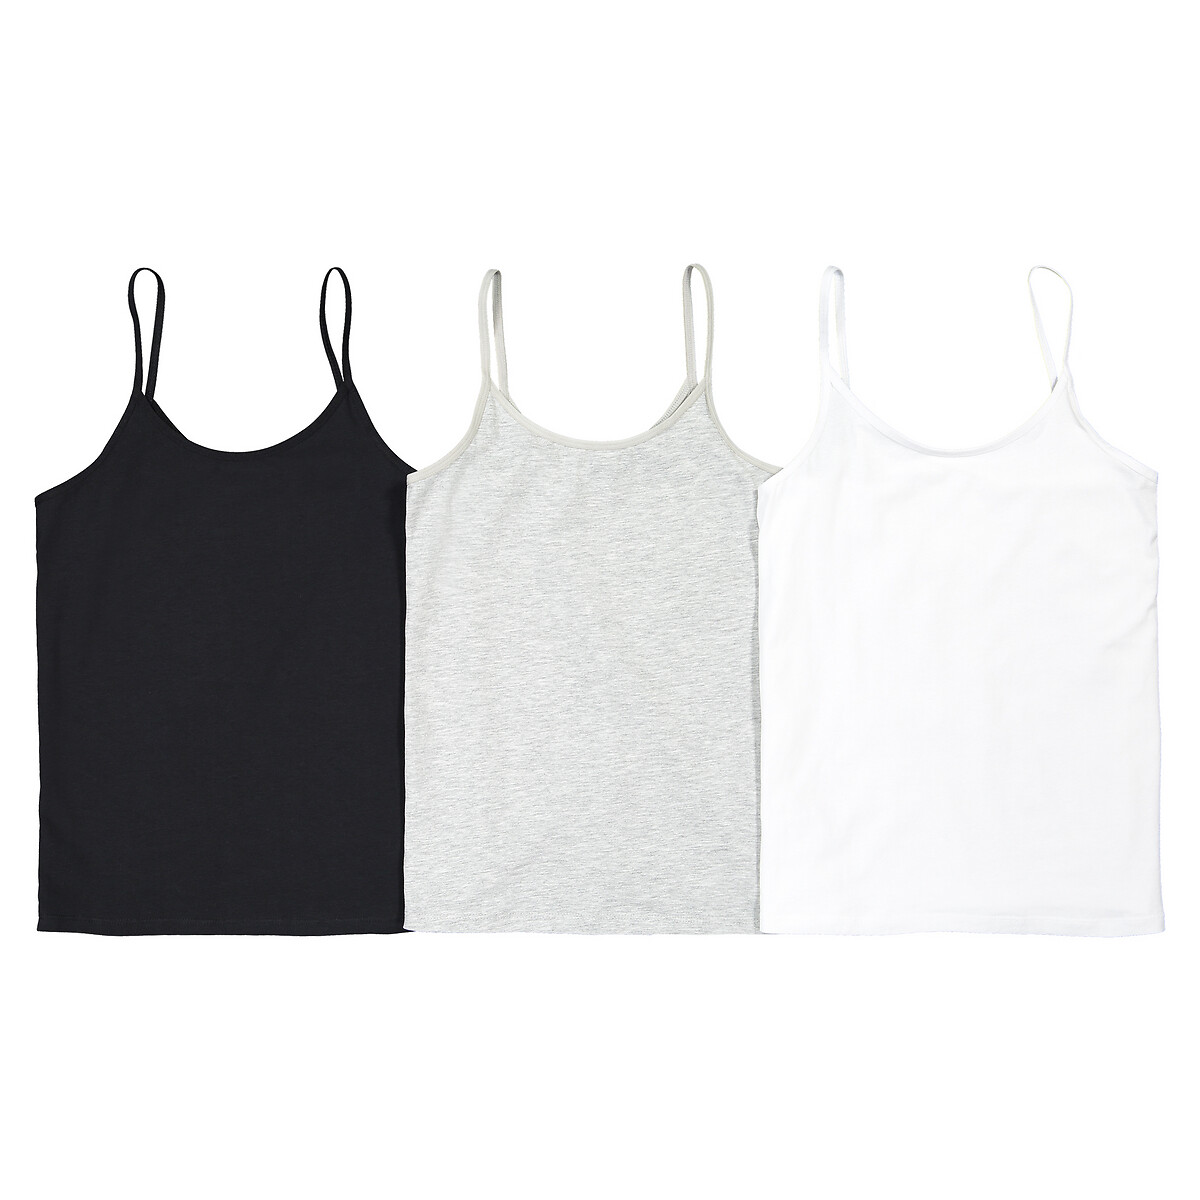 Pack of 3 Vest Tops in Plain Cotton